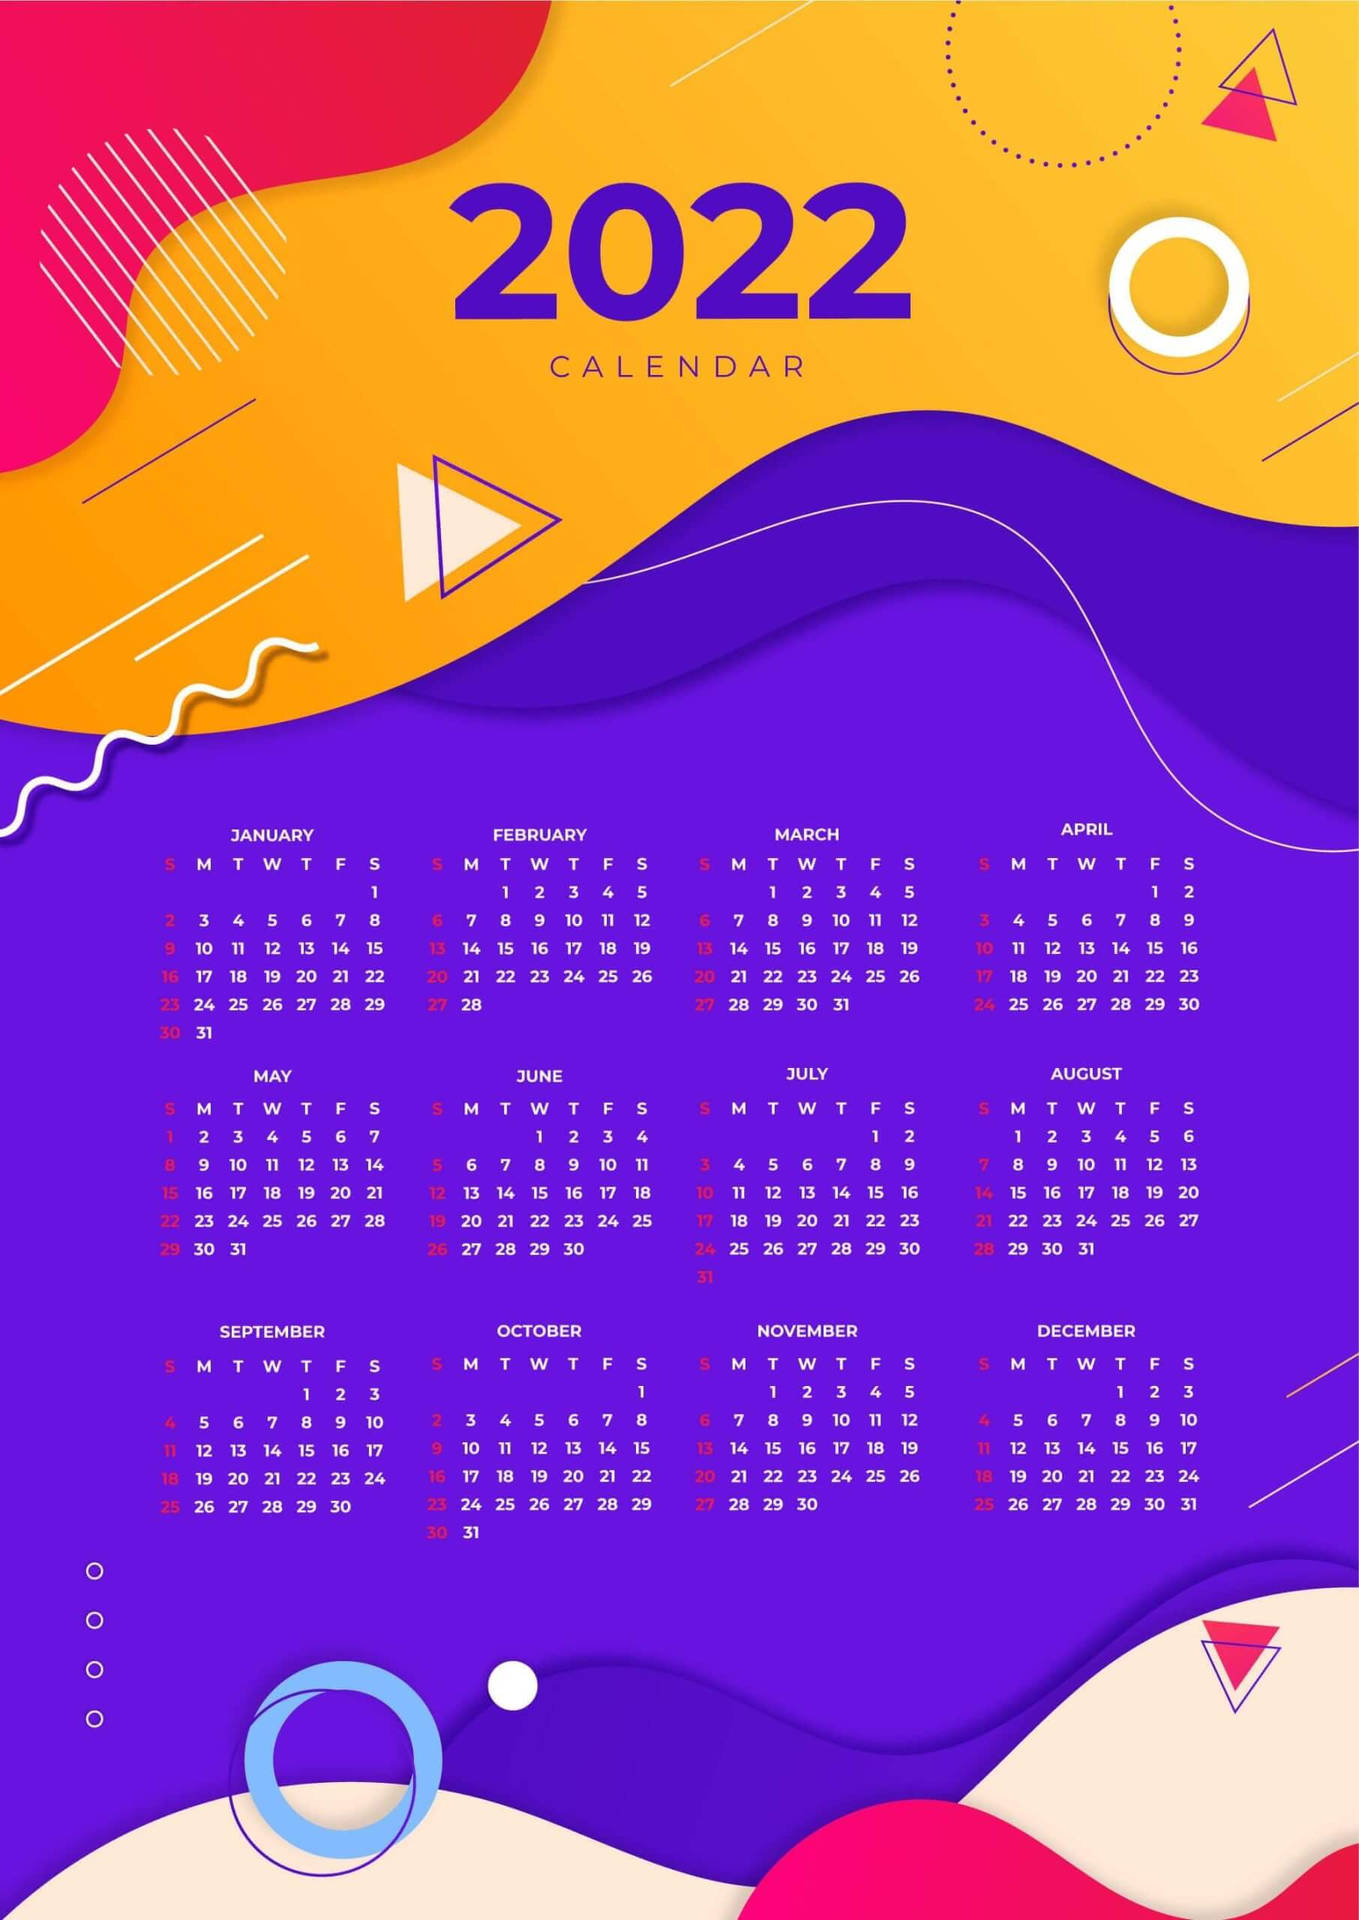 2022 Calendar With Shapes Background